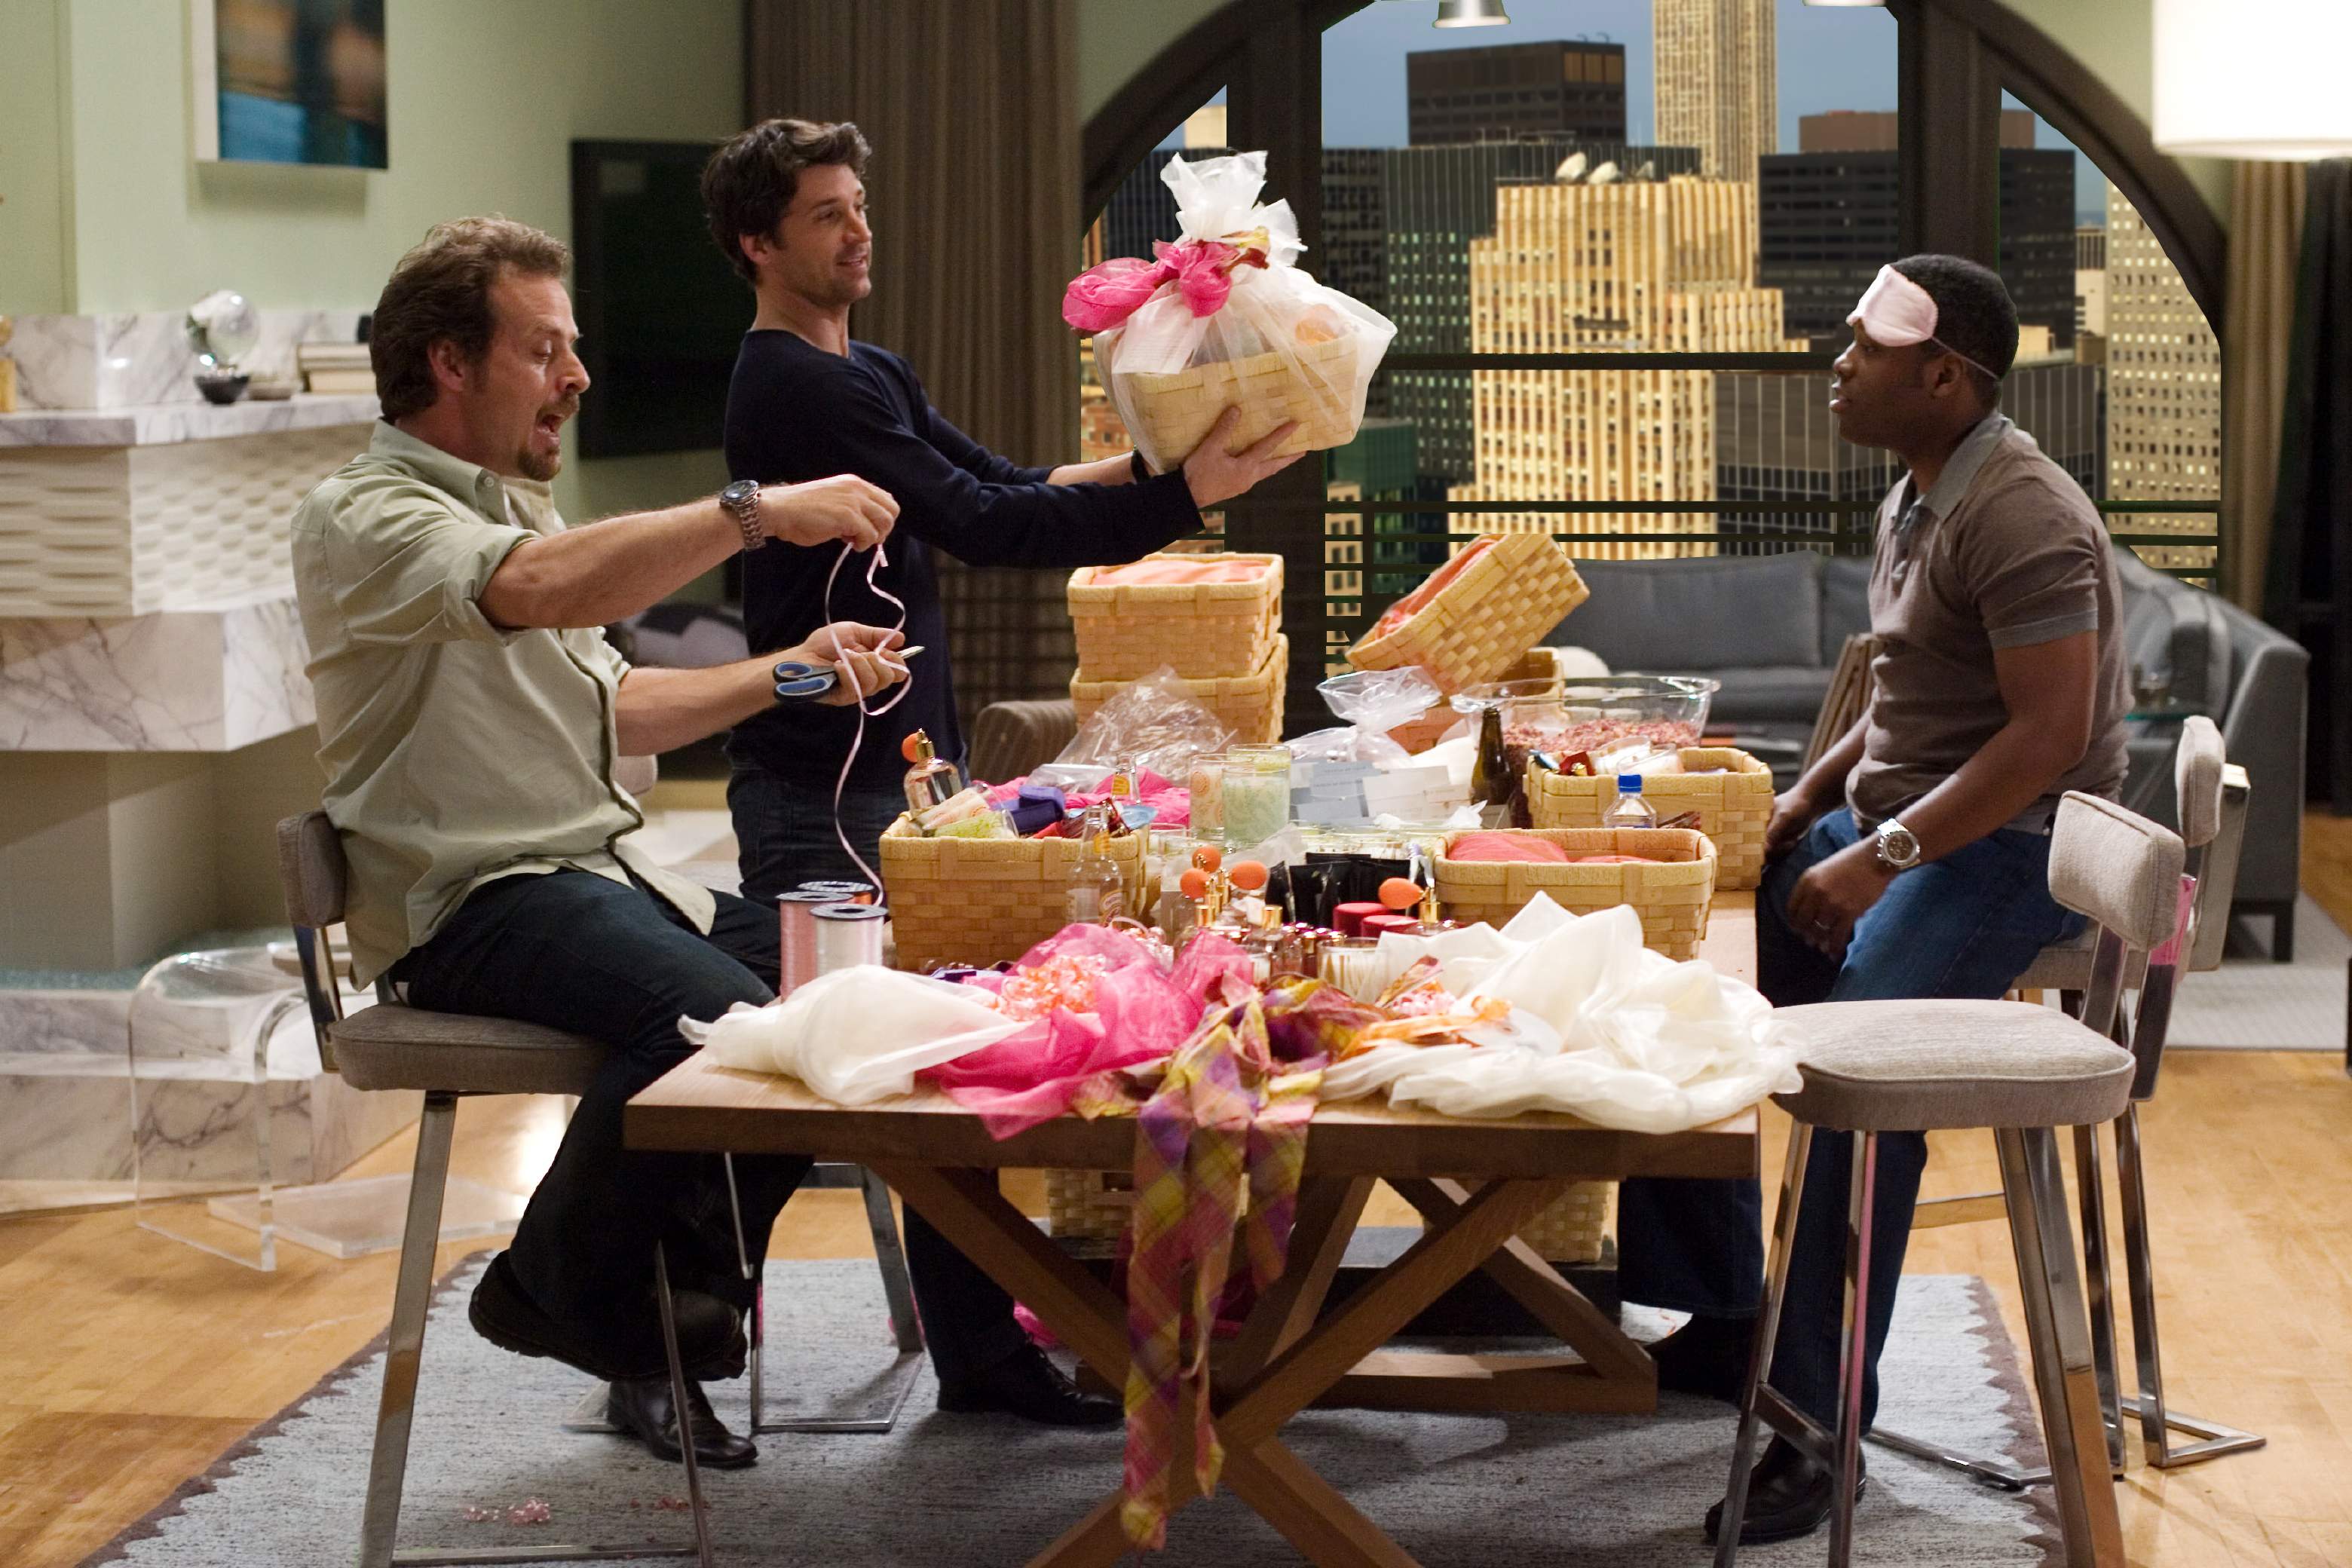 Patrick Dempsey as Tom, Richmond Arquette as Gary and Kadeem Hardison as Felix in Columbia Pictures' Made of Honor (2008). Photo credit: Peter Iovino.